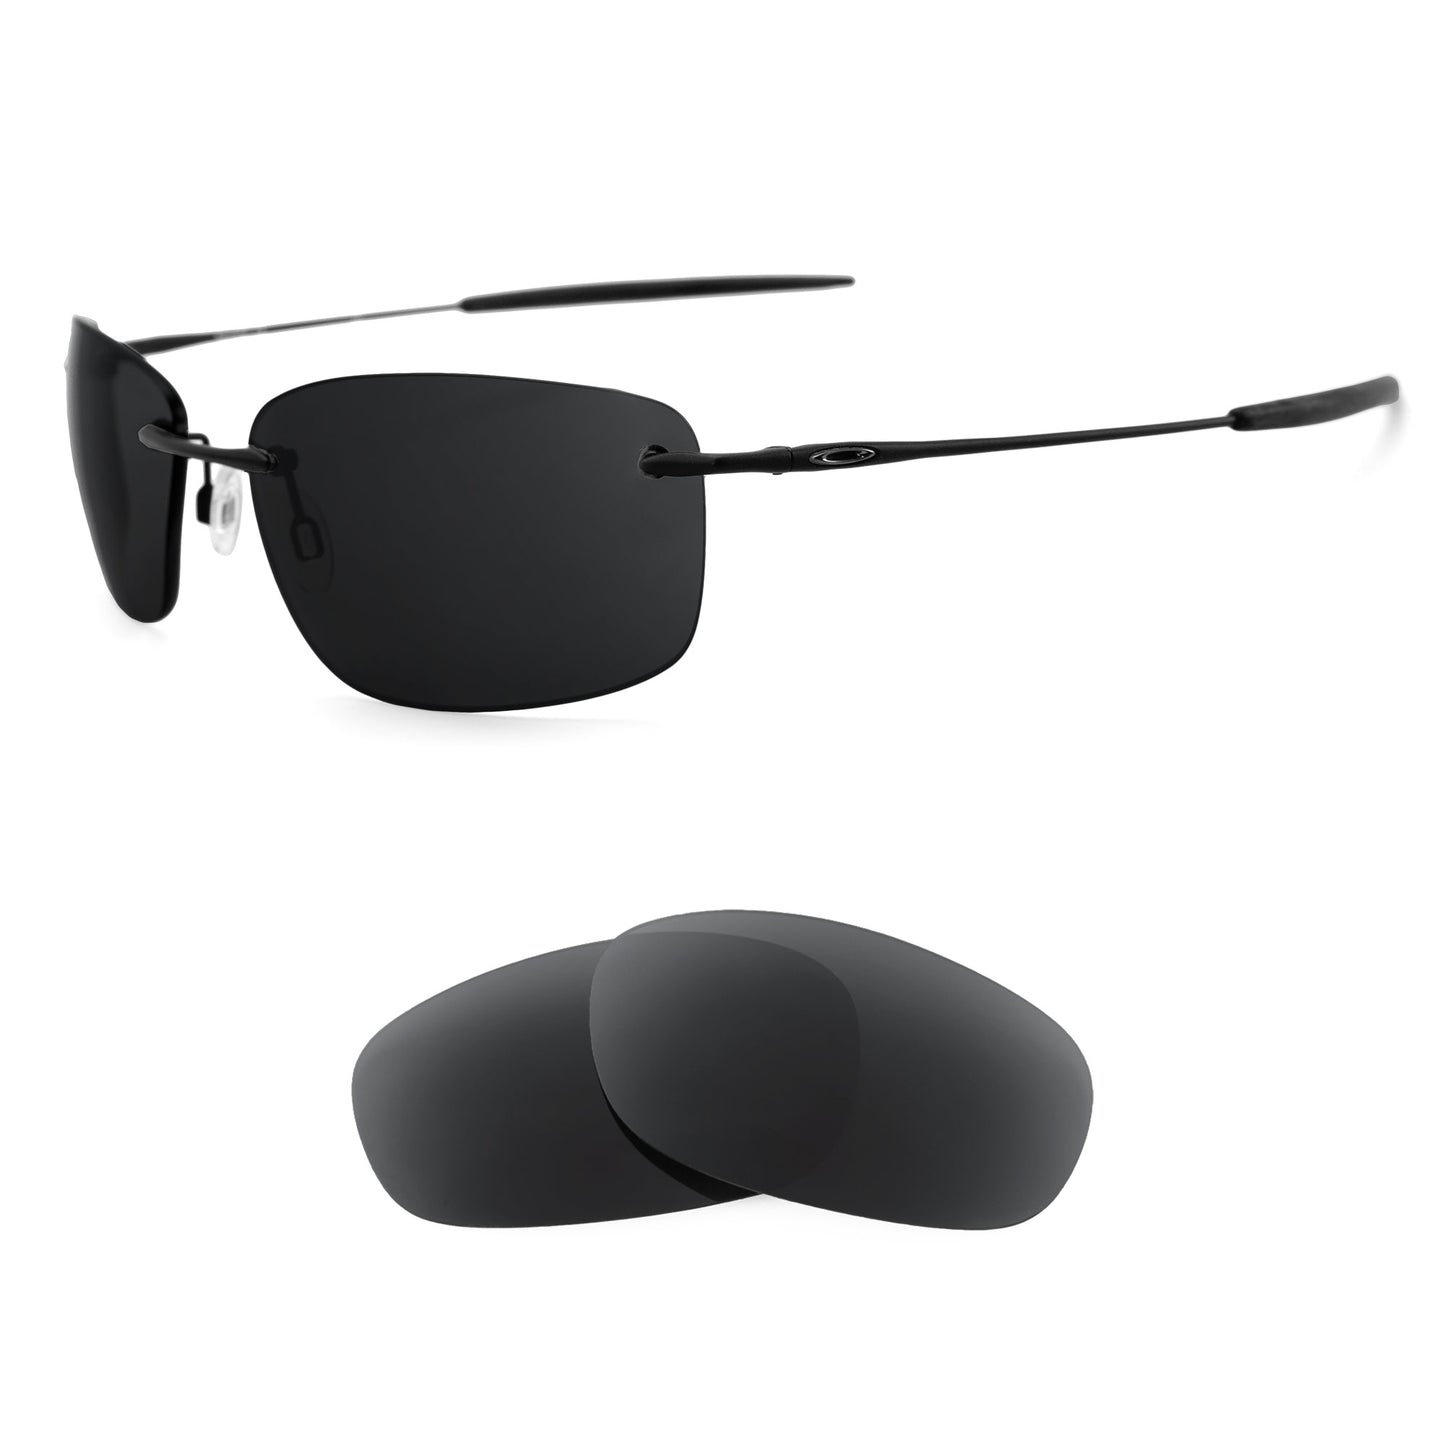 Oakley Nanowire 1.0 sunglasses with replacement lenses